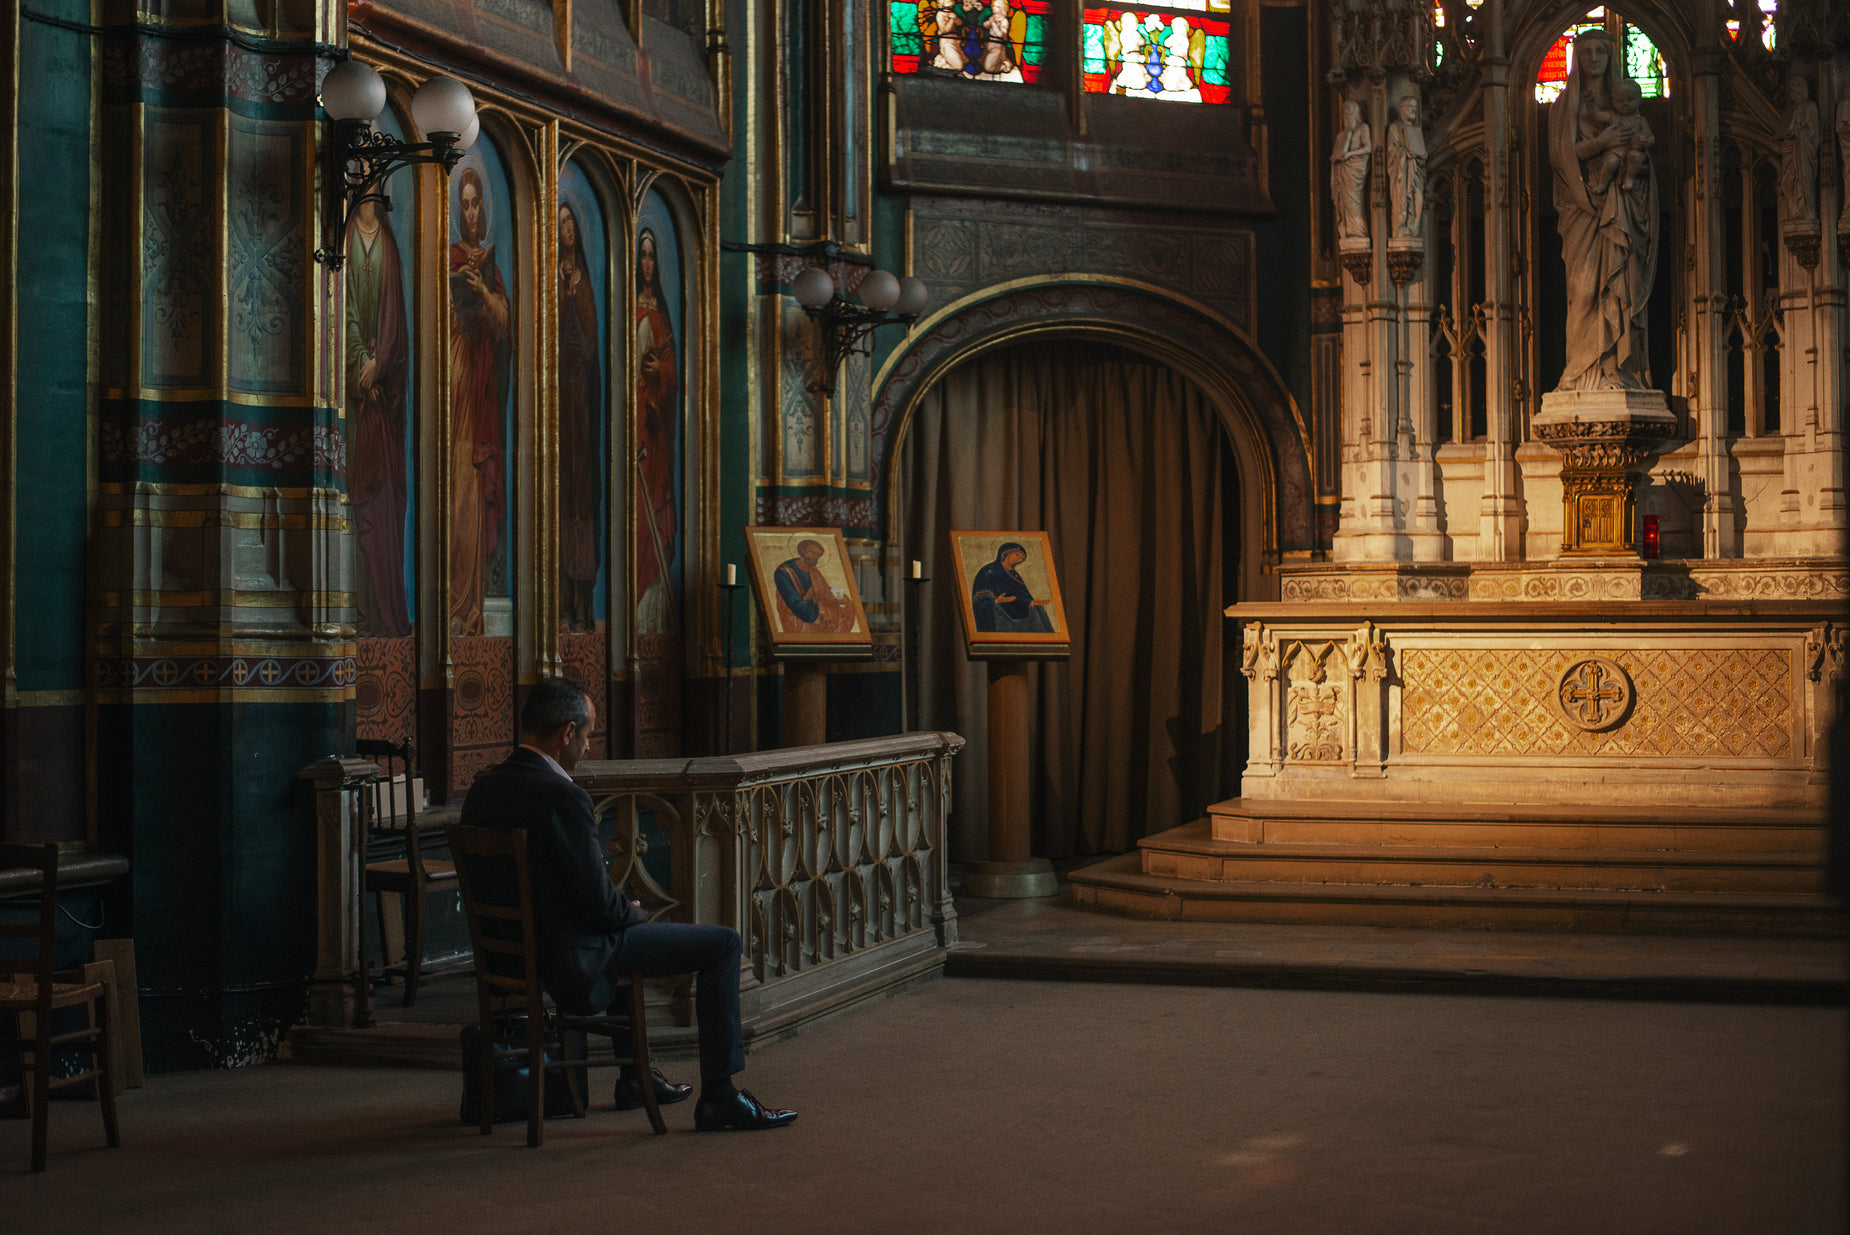 a person sitting at a alter of an old building